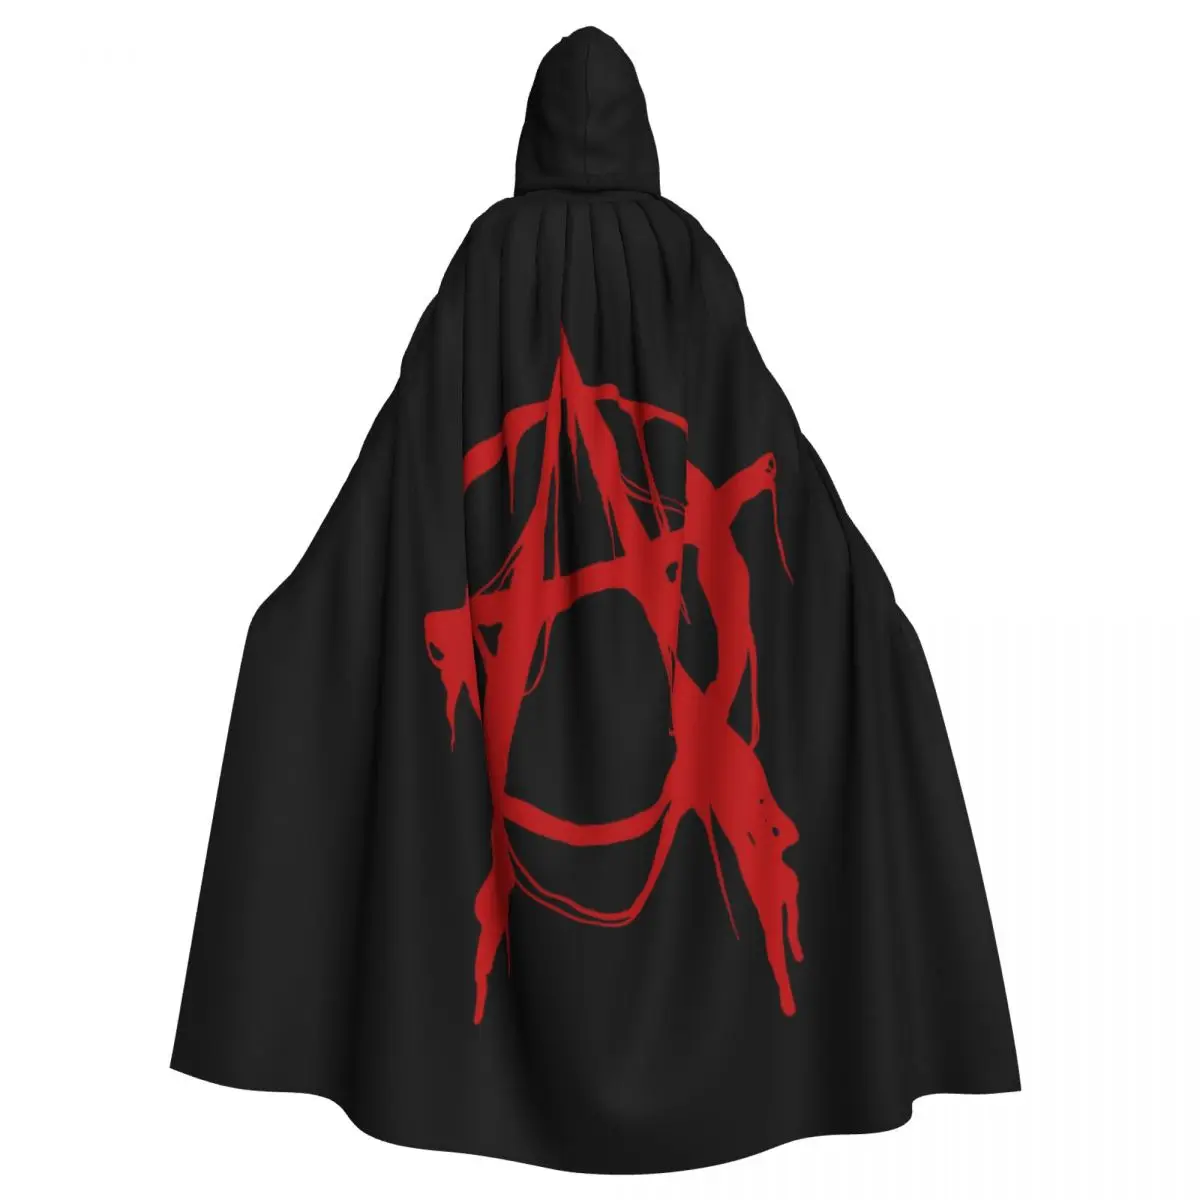 

Hooded Cloak Unisex Cloak with Hood Anarchy Symbol Cloak Vampire Witch Cape Cosplay Costume